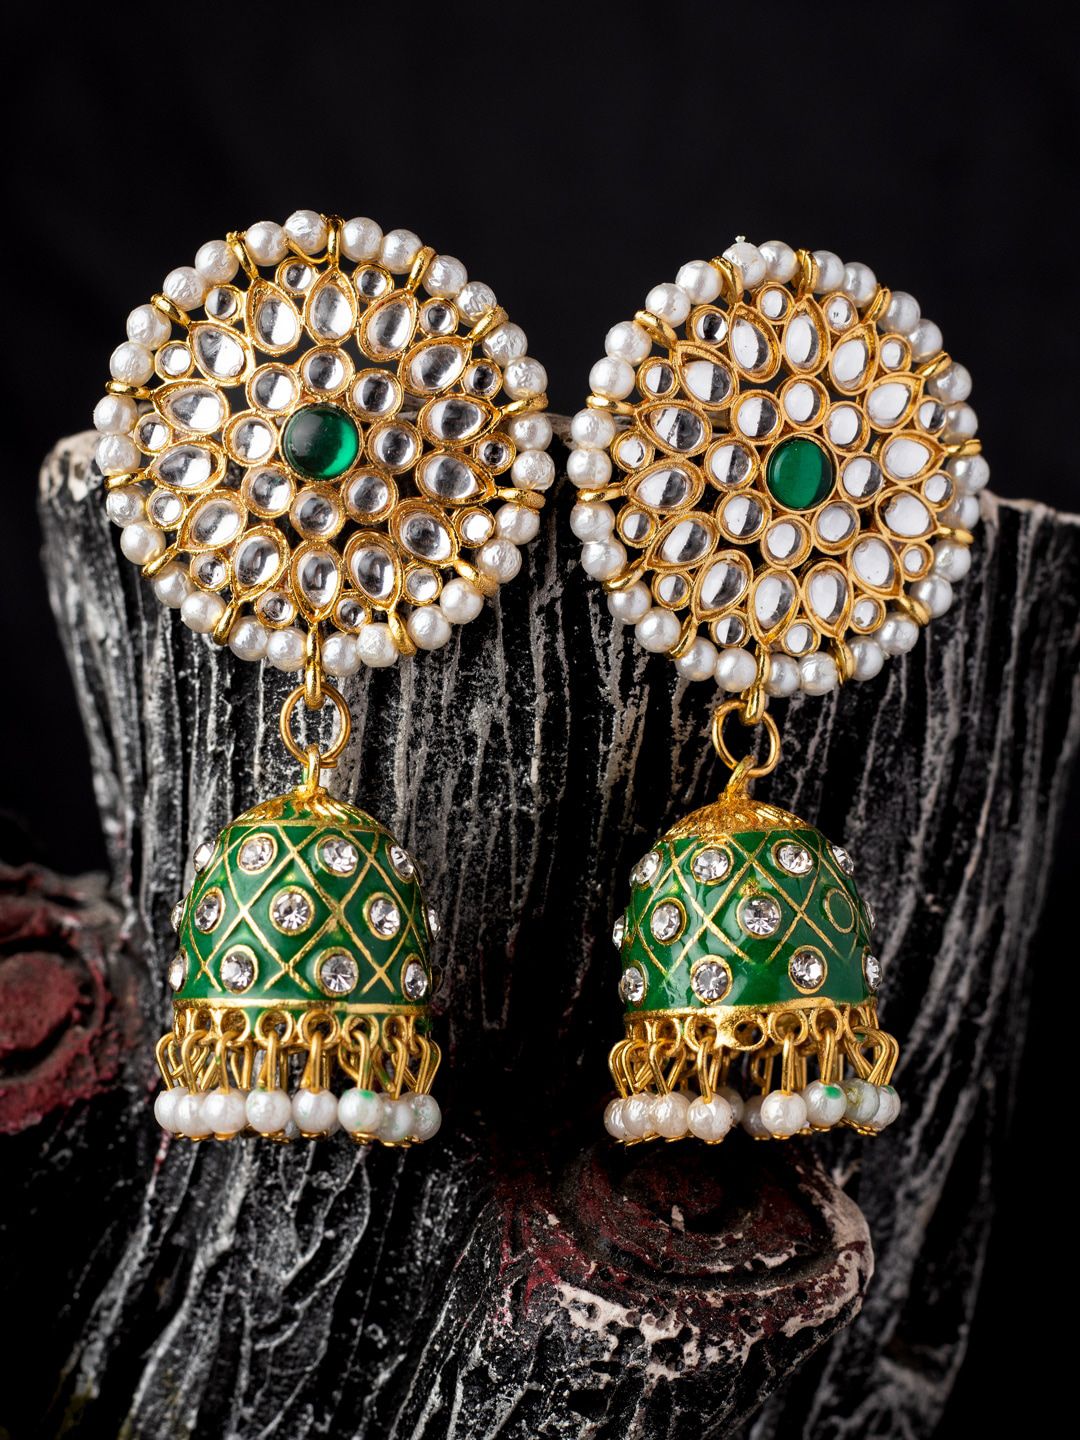 MORKANTH JEWELLERY Gold-Plated & Green Dome Shaped Jhumkas Earrings Price in India